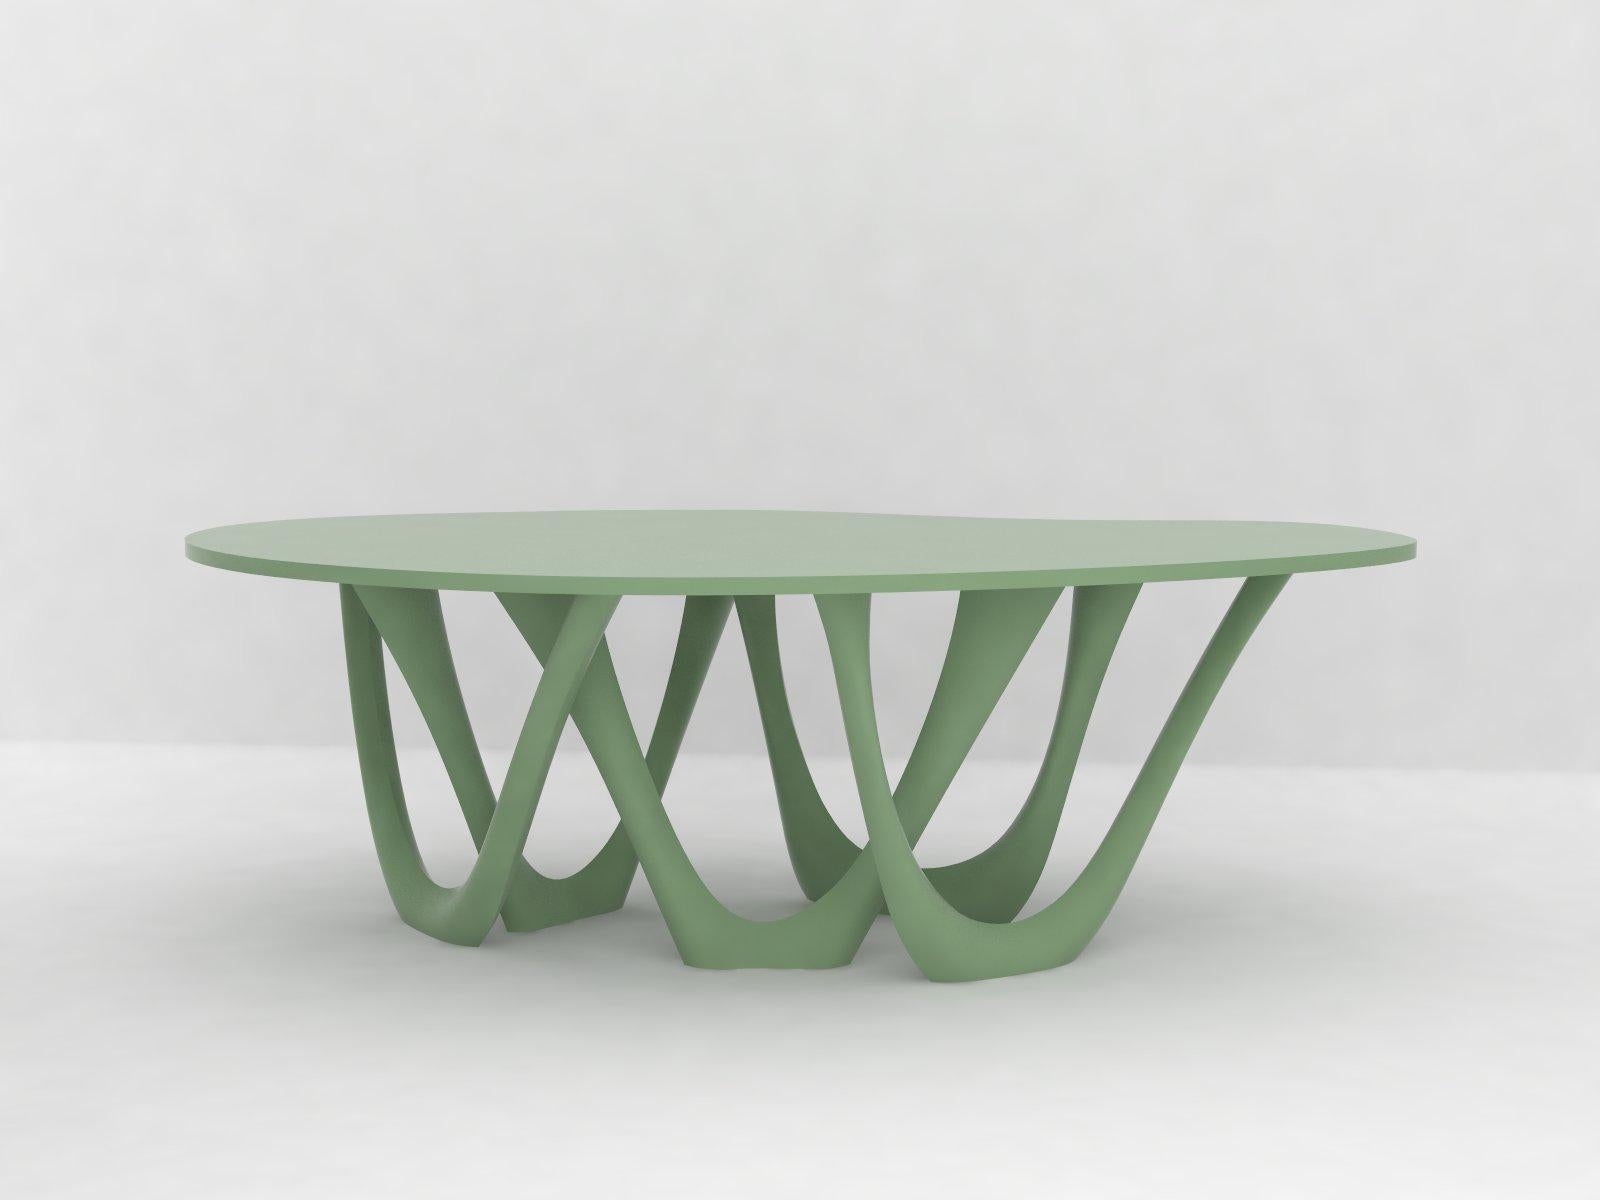 Polish G-Table B+C in Powder-Coated Aluminum with Concrete Top by Zieta For Sale